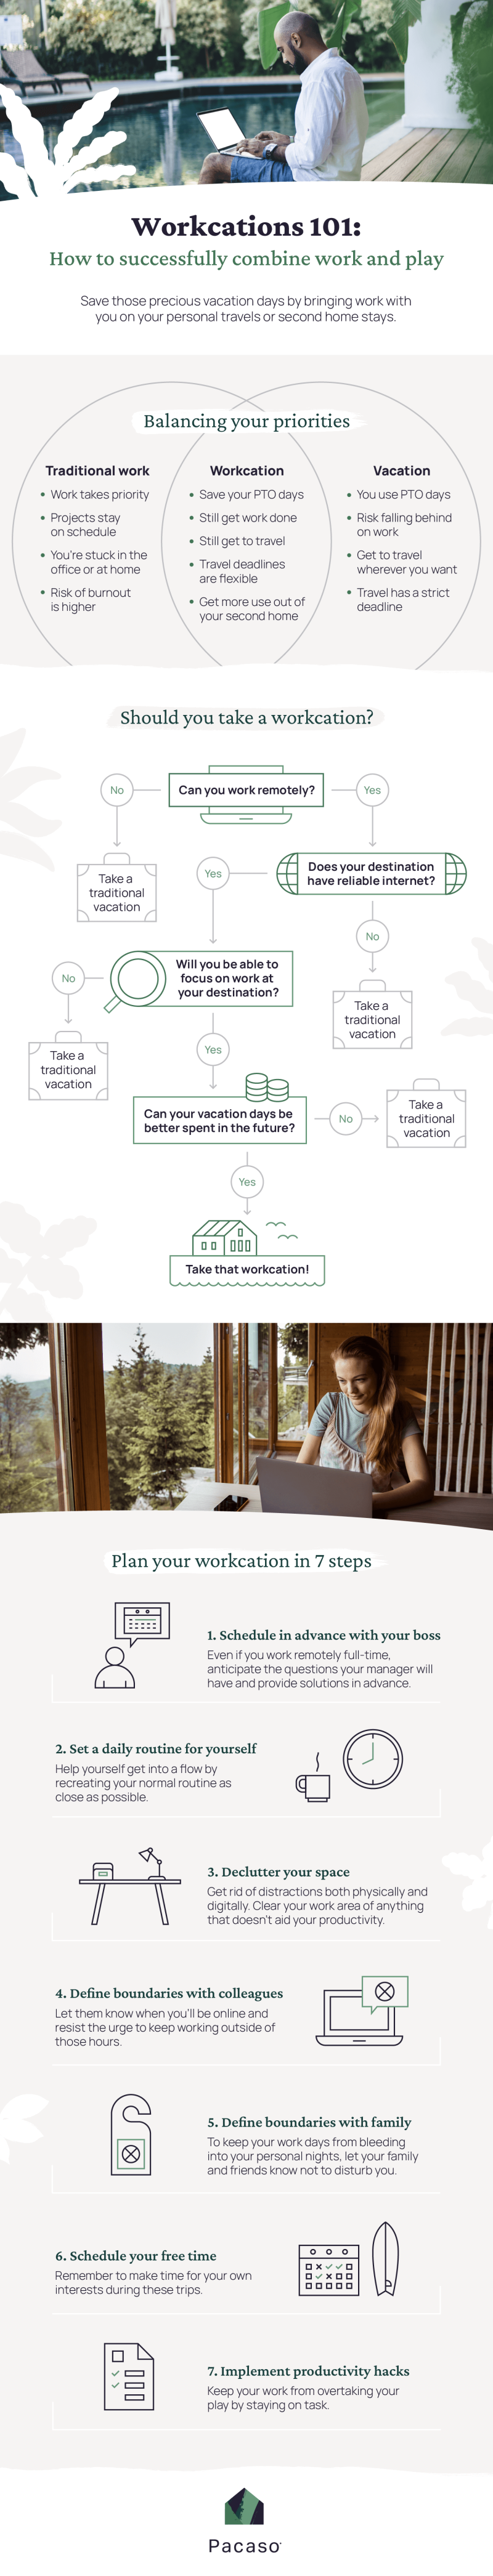 Workcations infographic highlights how to combine work and vacation